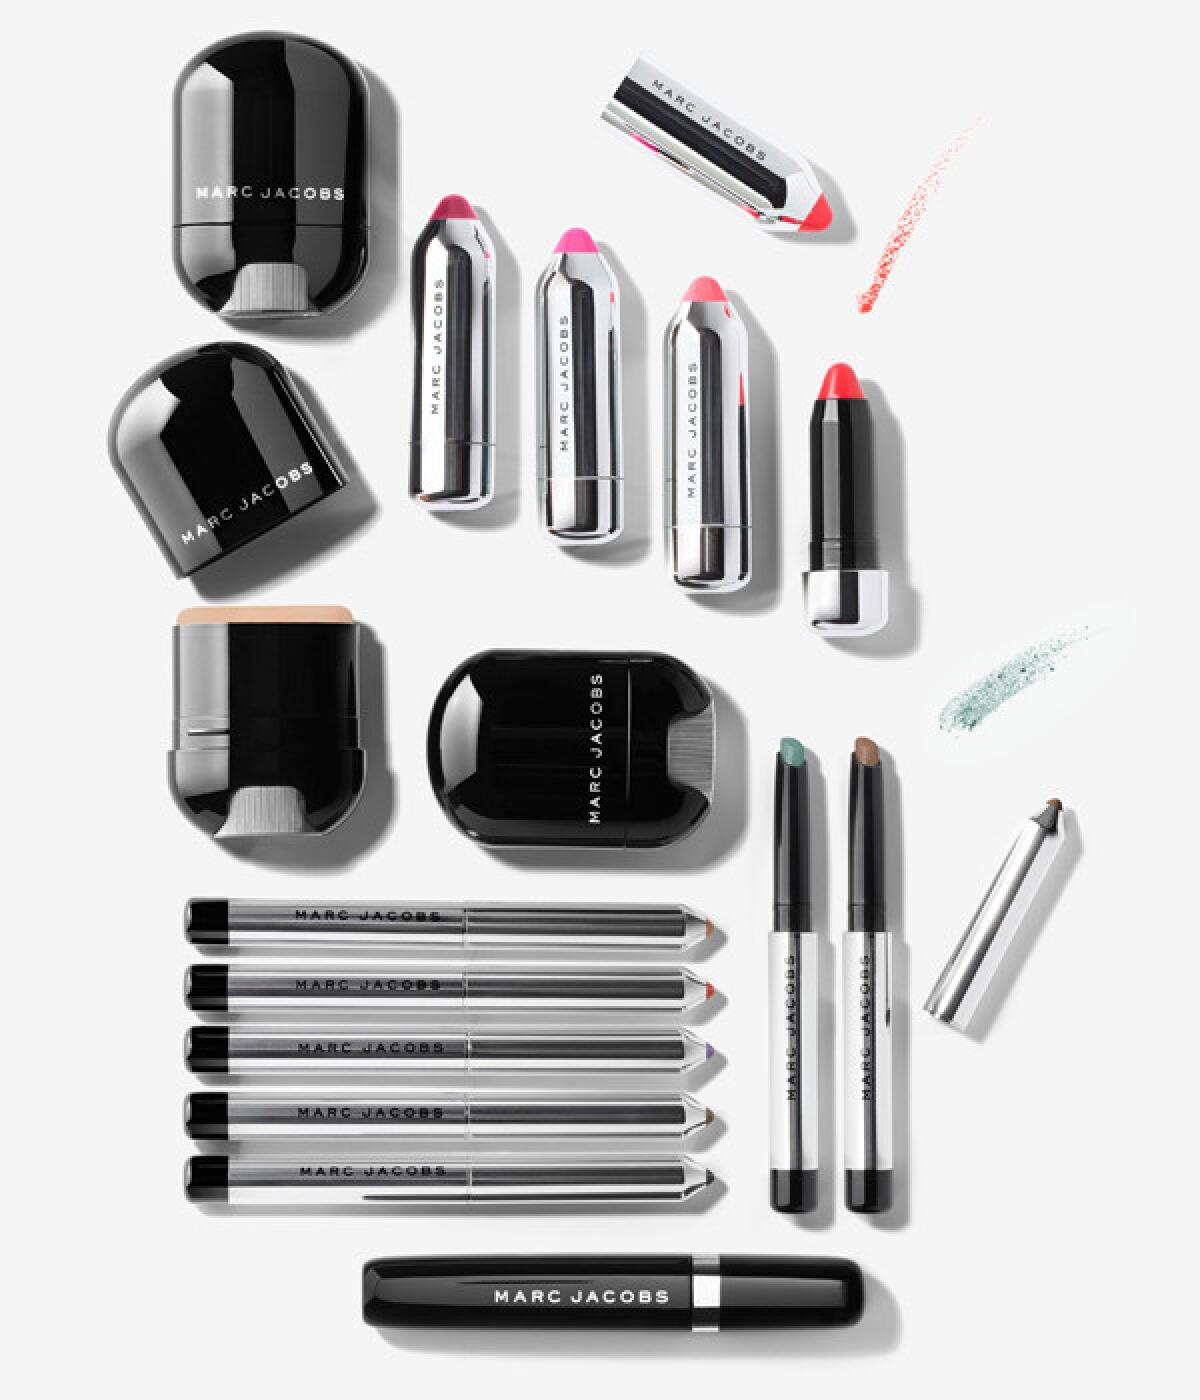 Marc Jacobs Beauty fall 2014 collection ($18-$42) at marcjacobsbeauty.com and sephora.com